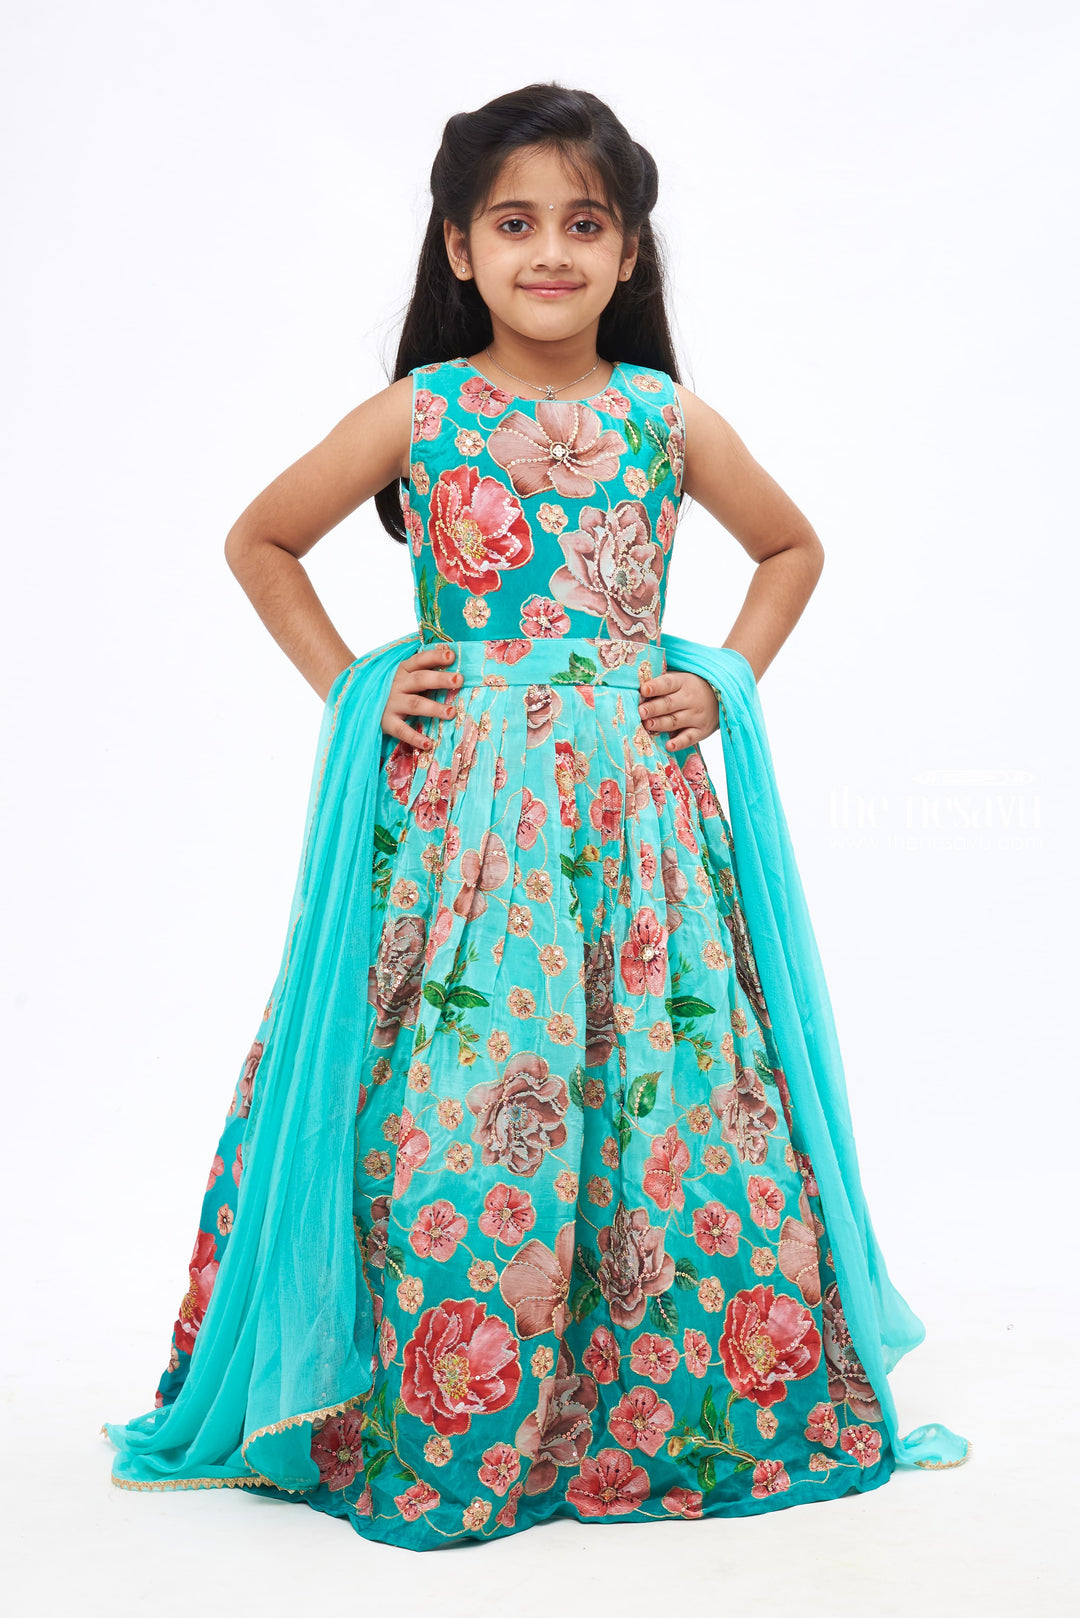 The Nesavu Girls Party Gown Girls Elegant Turquoise Floral Anarkali Gown with Sheer Dupatta Nesavu 24 (5Y) / Blue / Chinnon GA186A-24 Festive Children's Outfit | Traditional Indian Wear for Girls | Anarkali Gown | The Nesavu